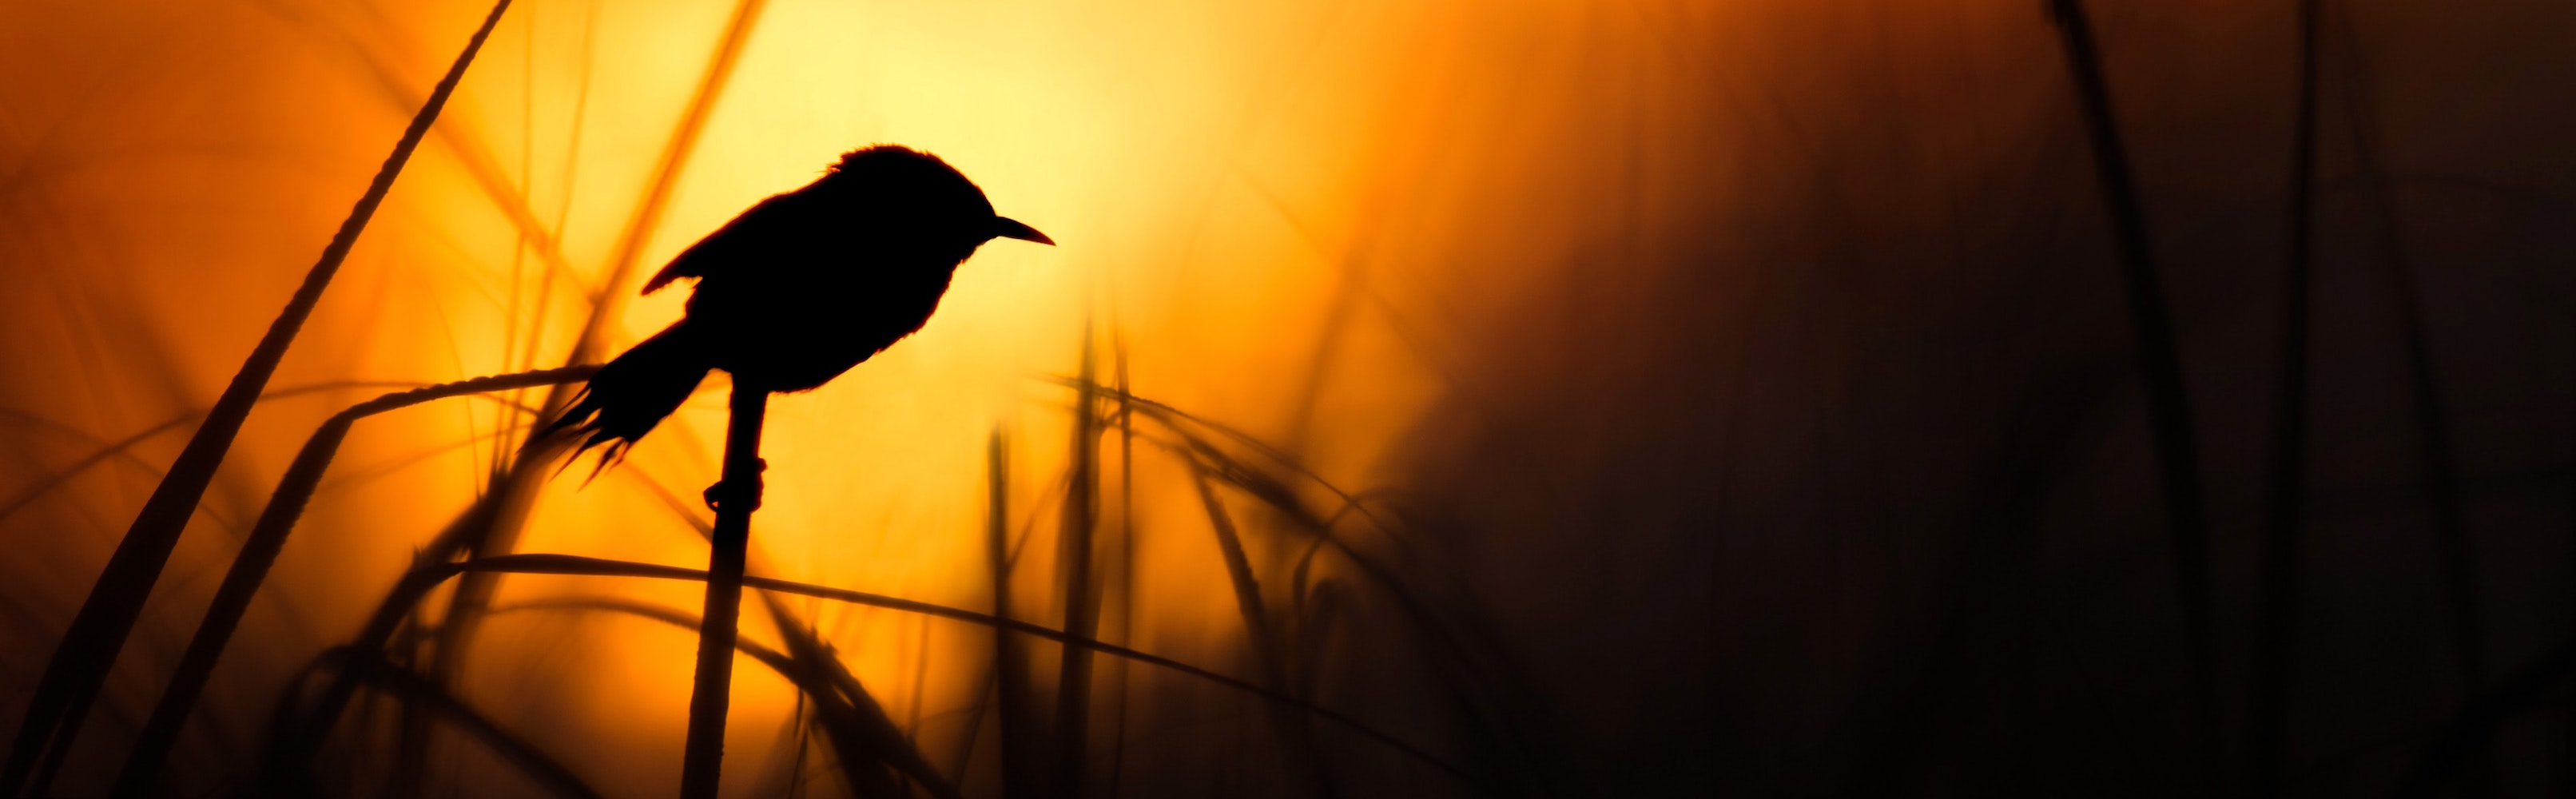 A bird silhouetted against the sunset. 